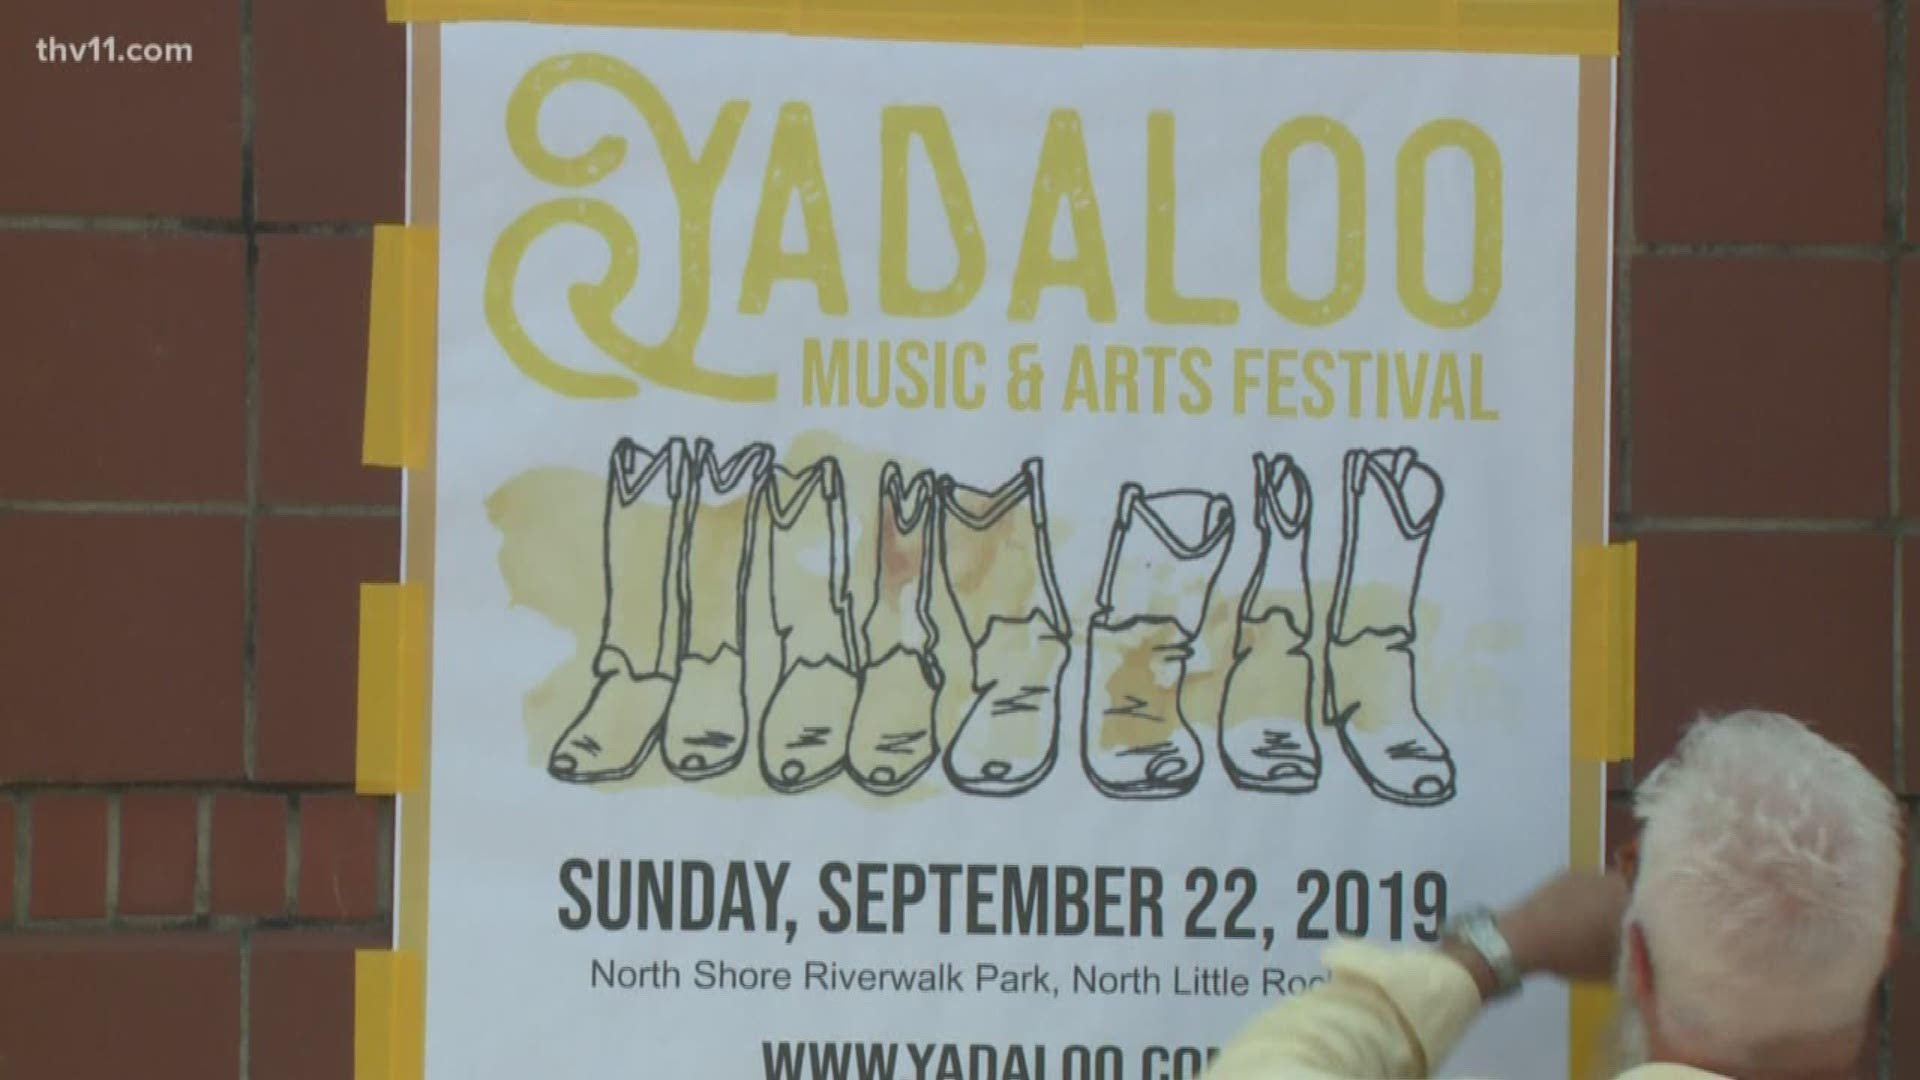 A new county music festival named Yadaloo is coming to Little Rock in September.